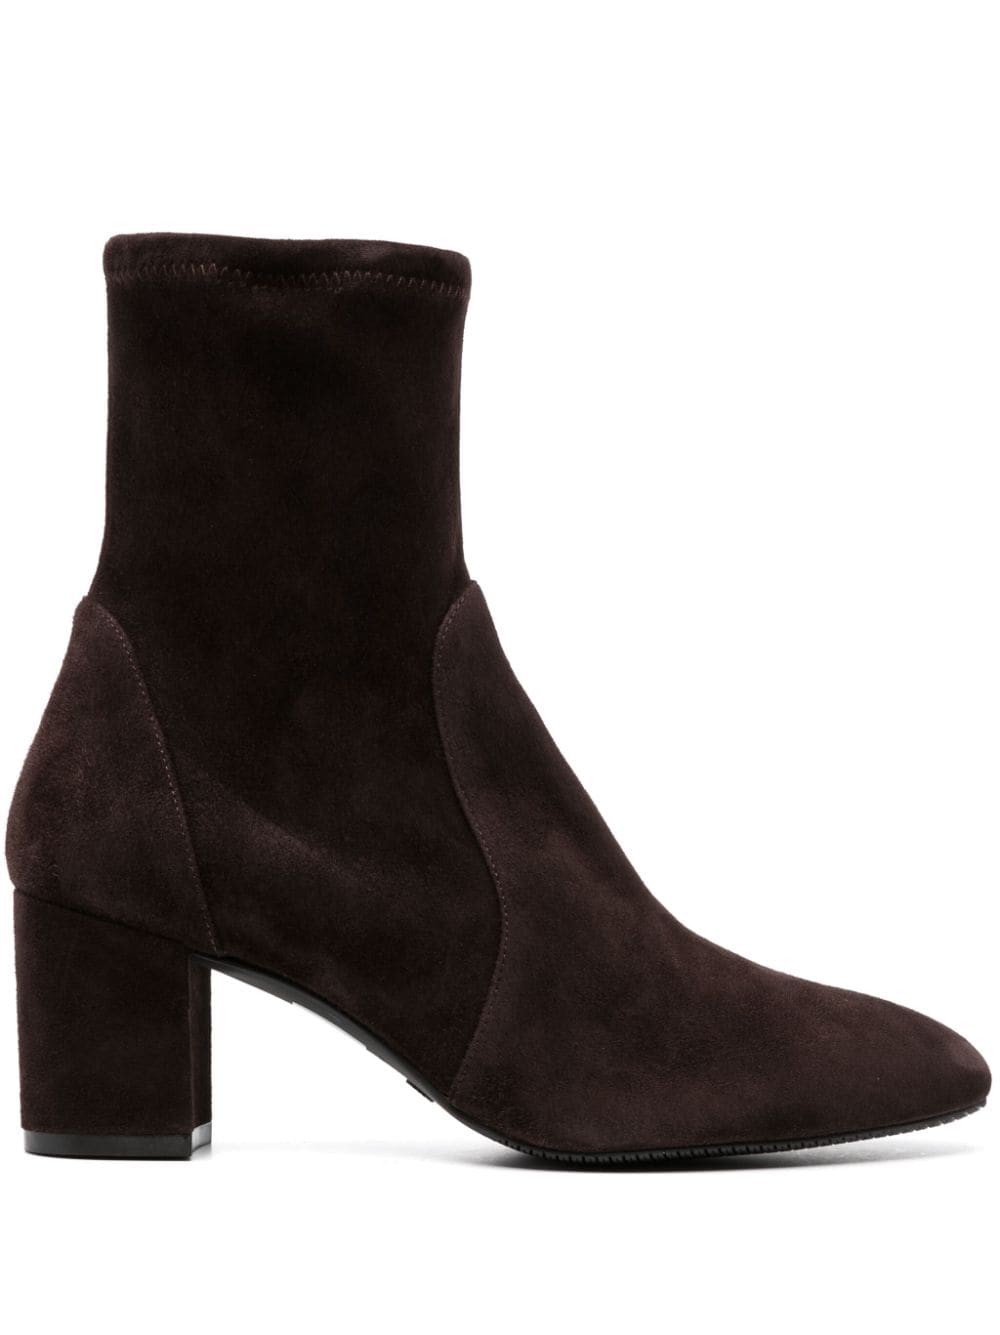 Yuliana 80mm suede ankle boots